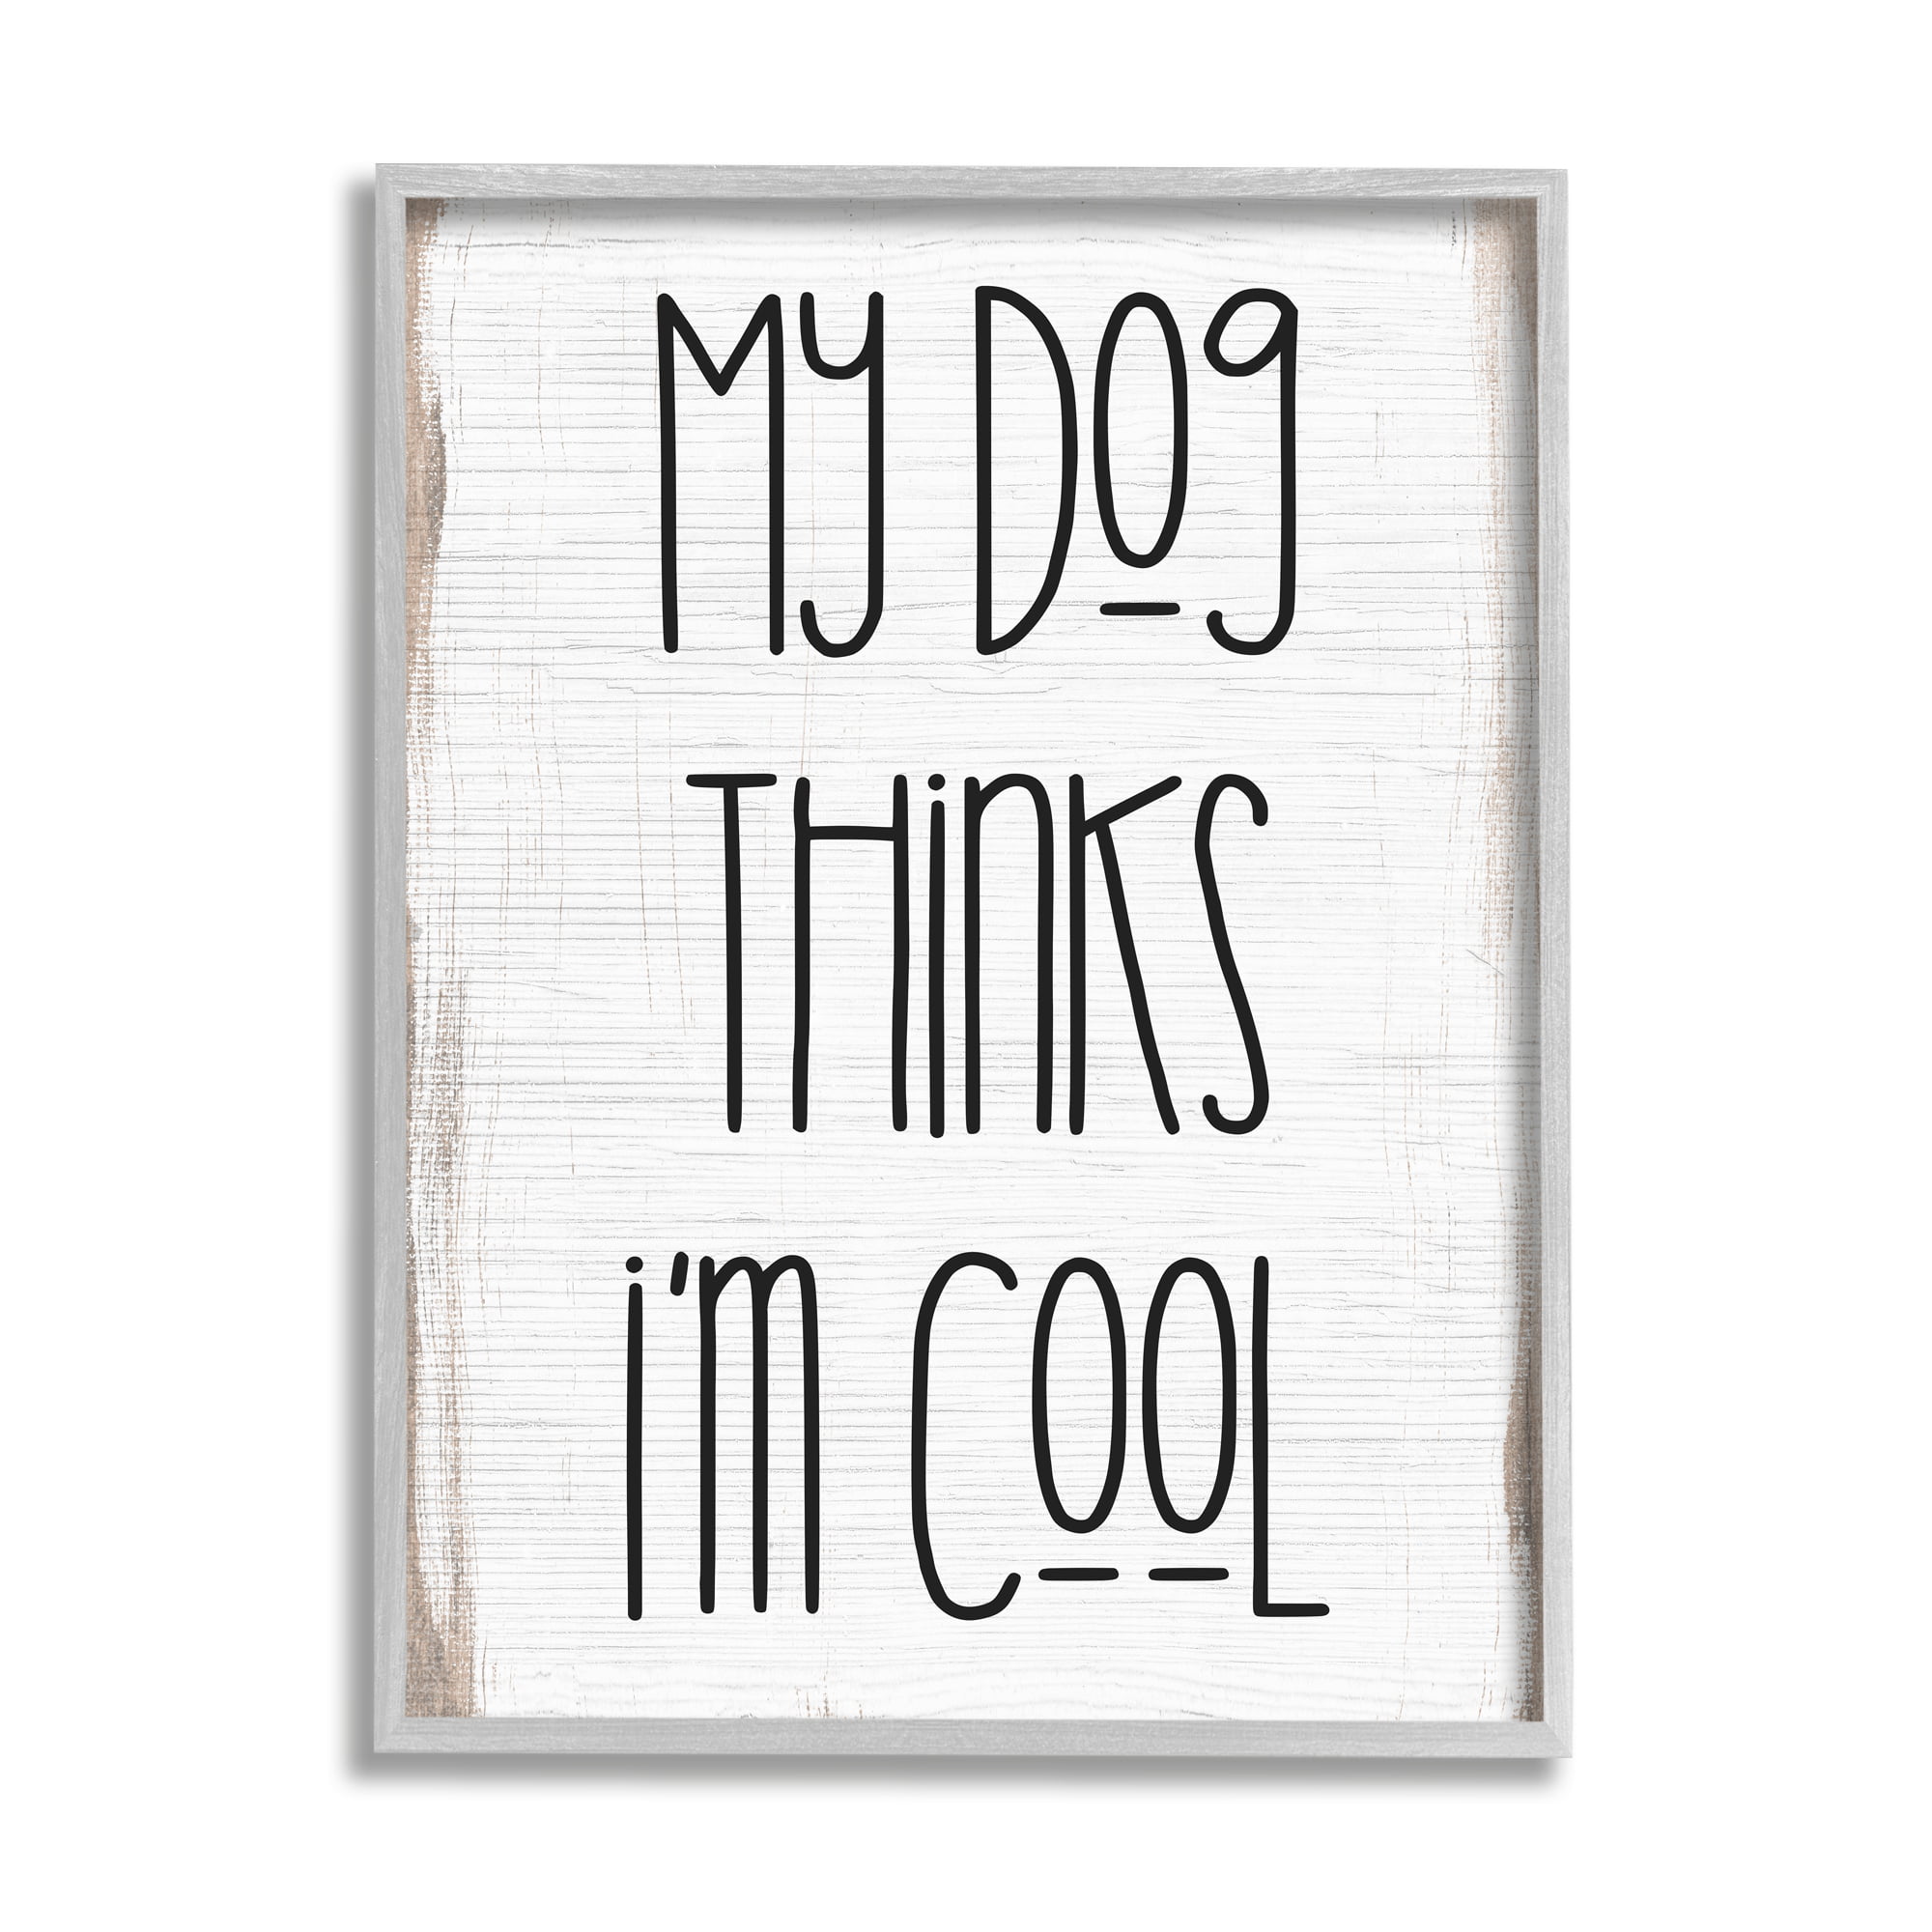 Omkostningsprocent molester Kilde Stupell Industries Dog Thinks I'm Cool Pet Phrase Rustic Modern  Typography,16 x 20, Design by Daphne Polselli - Walmart.com